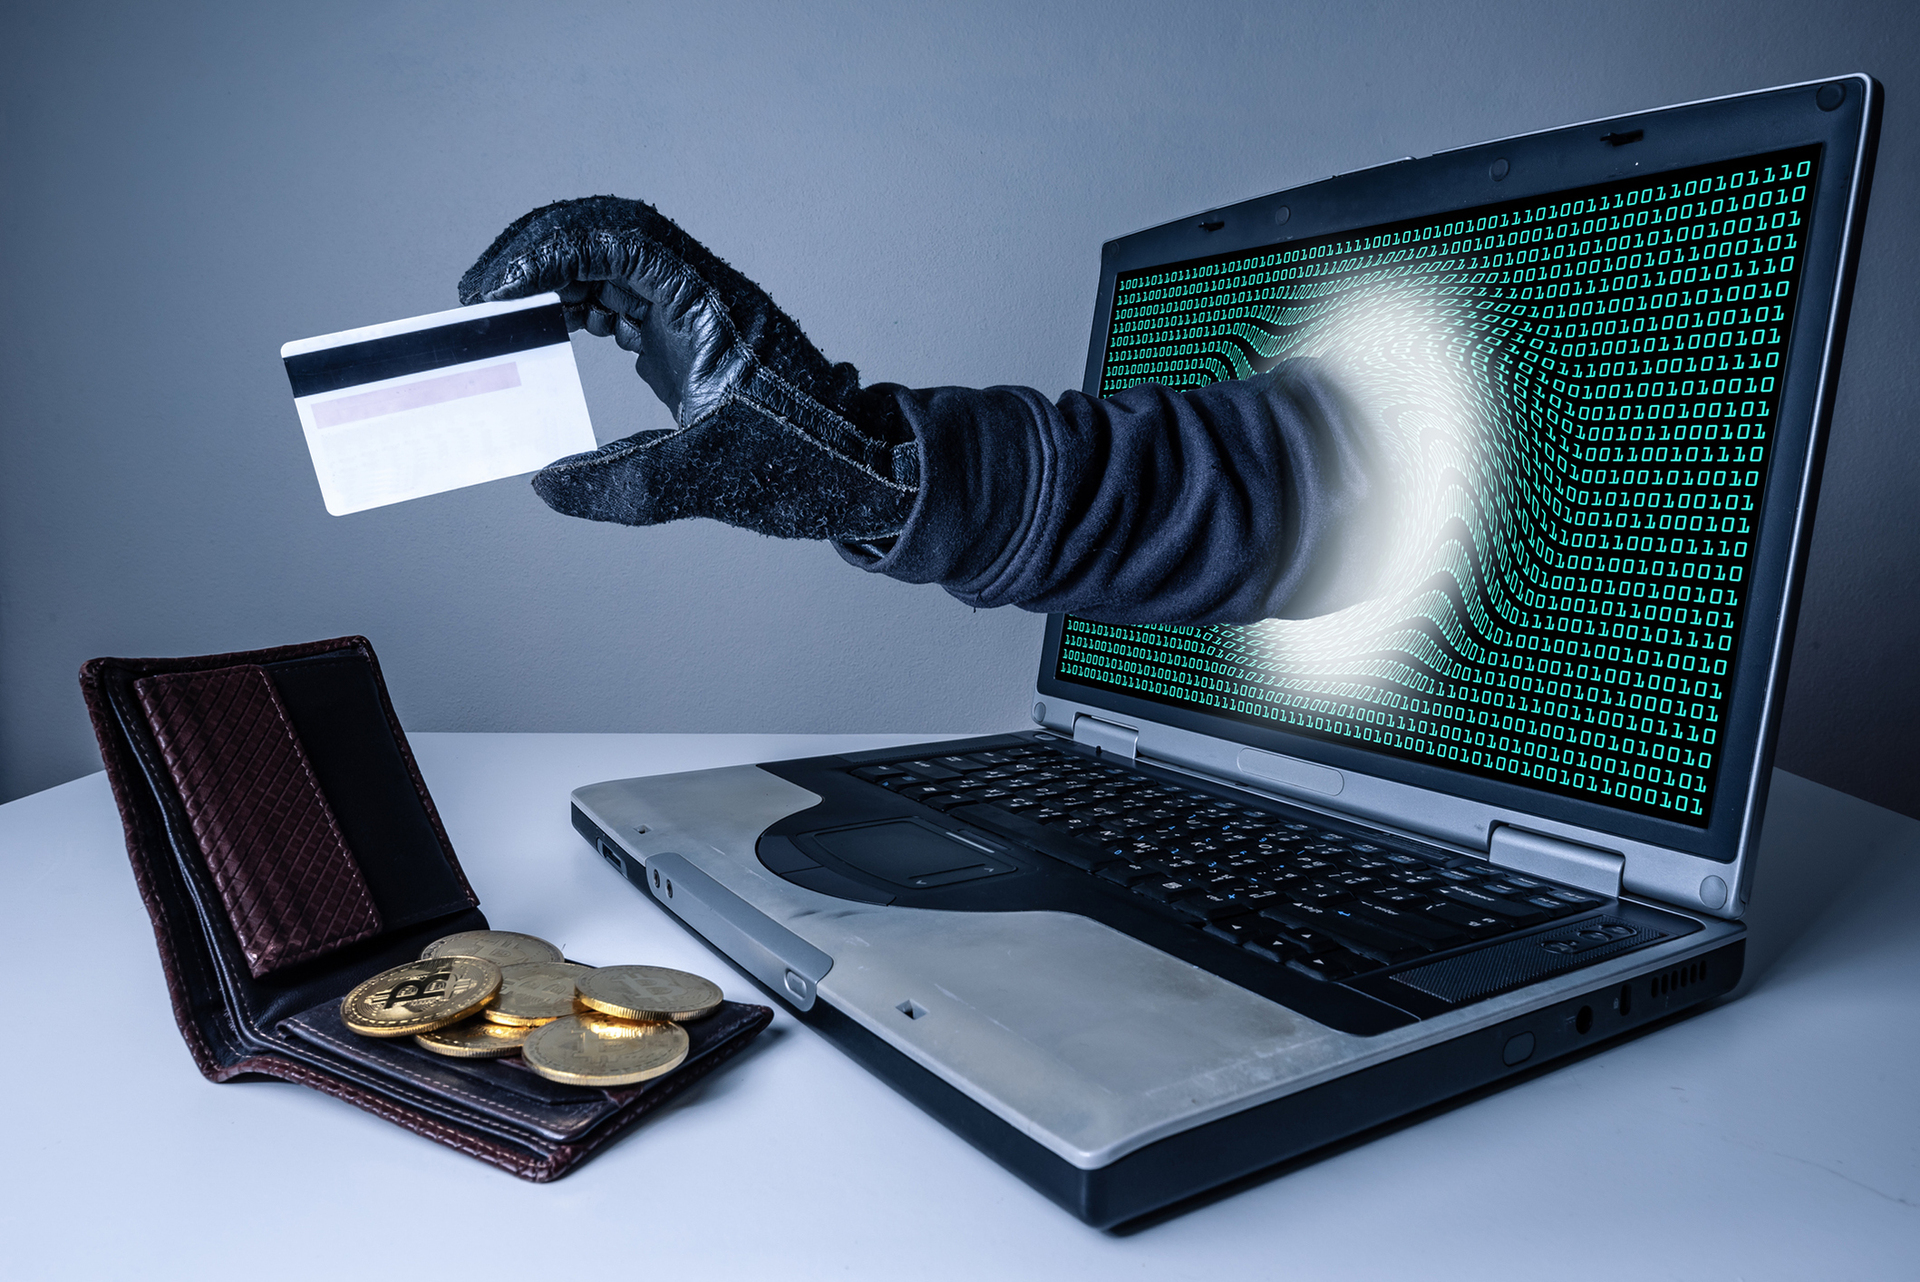 The abstract image of the hacker's hand reach through a laptop screen for stealing credit card in a wallet. the concept of cyber attack, virus, malware, illegally and cyber security.